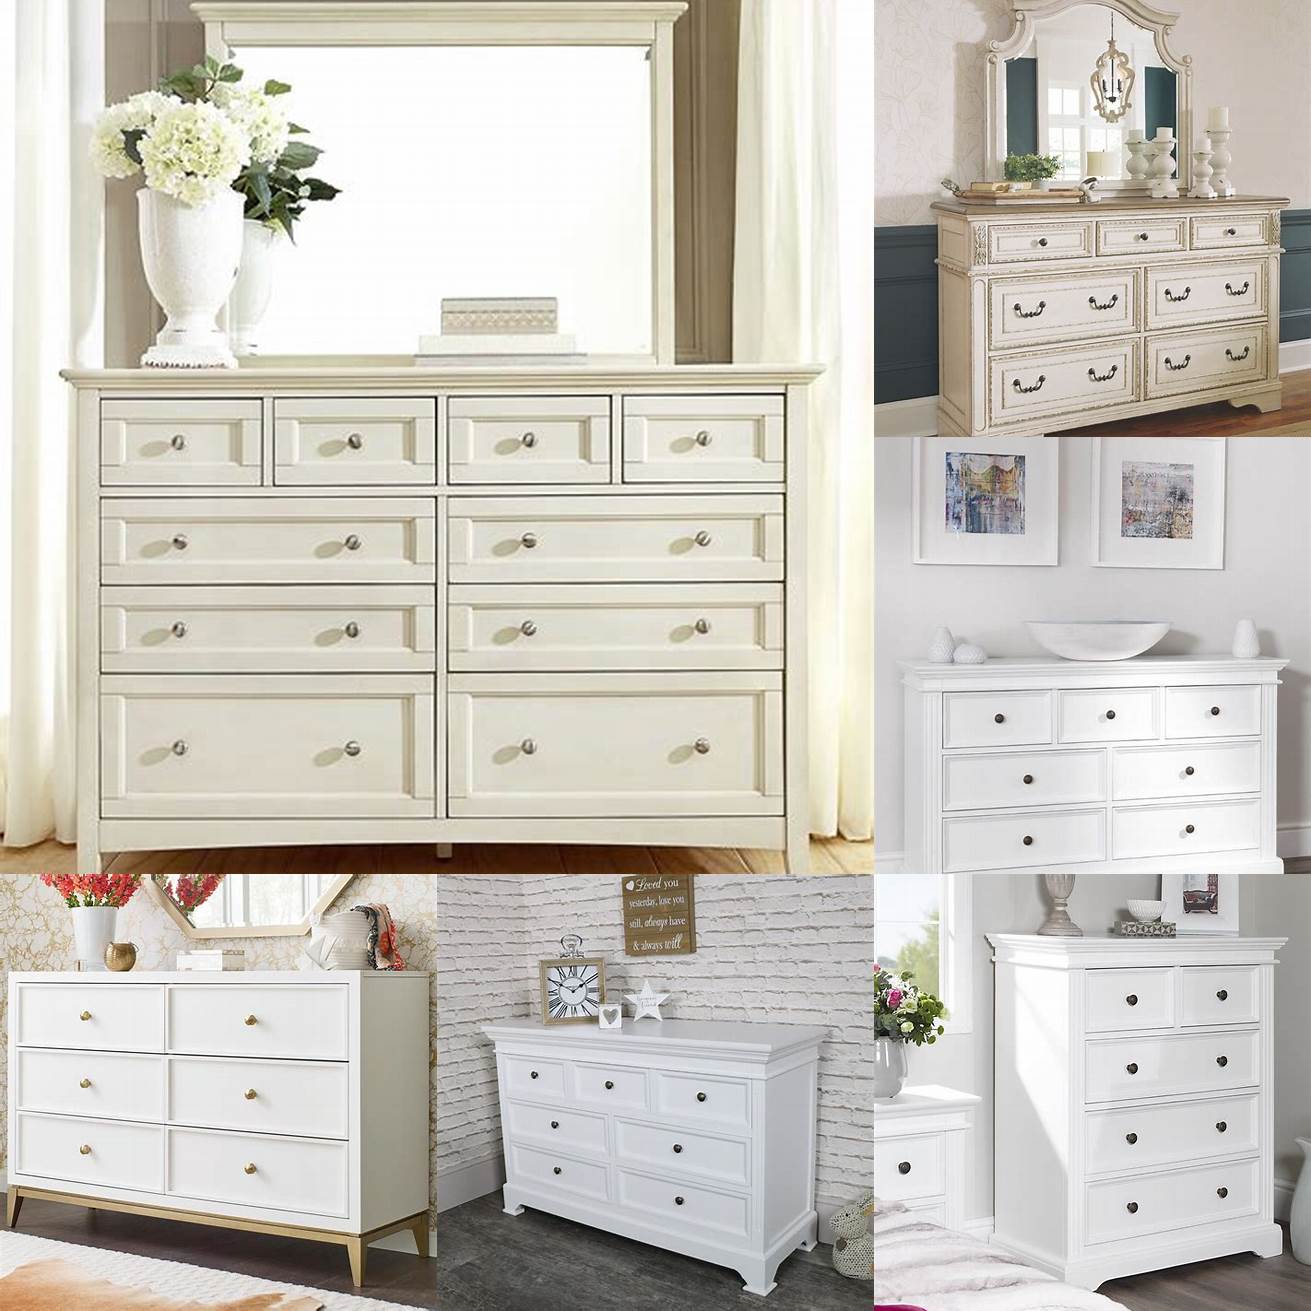 A white bedroom chest is a classic and timeless choice that works well with any decor